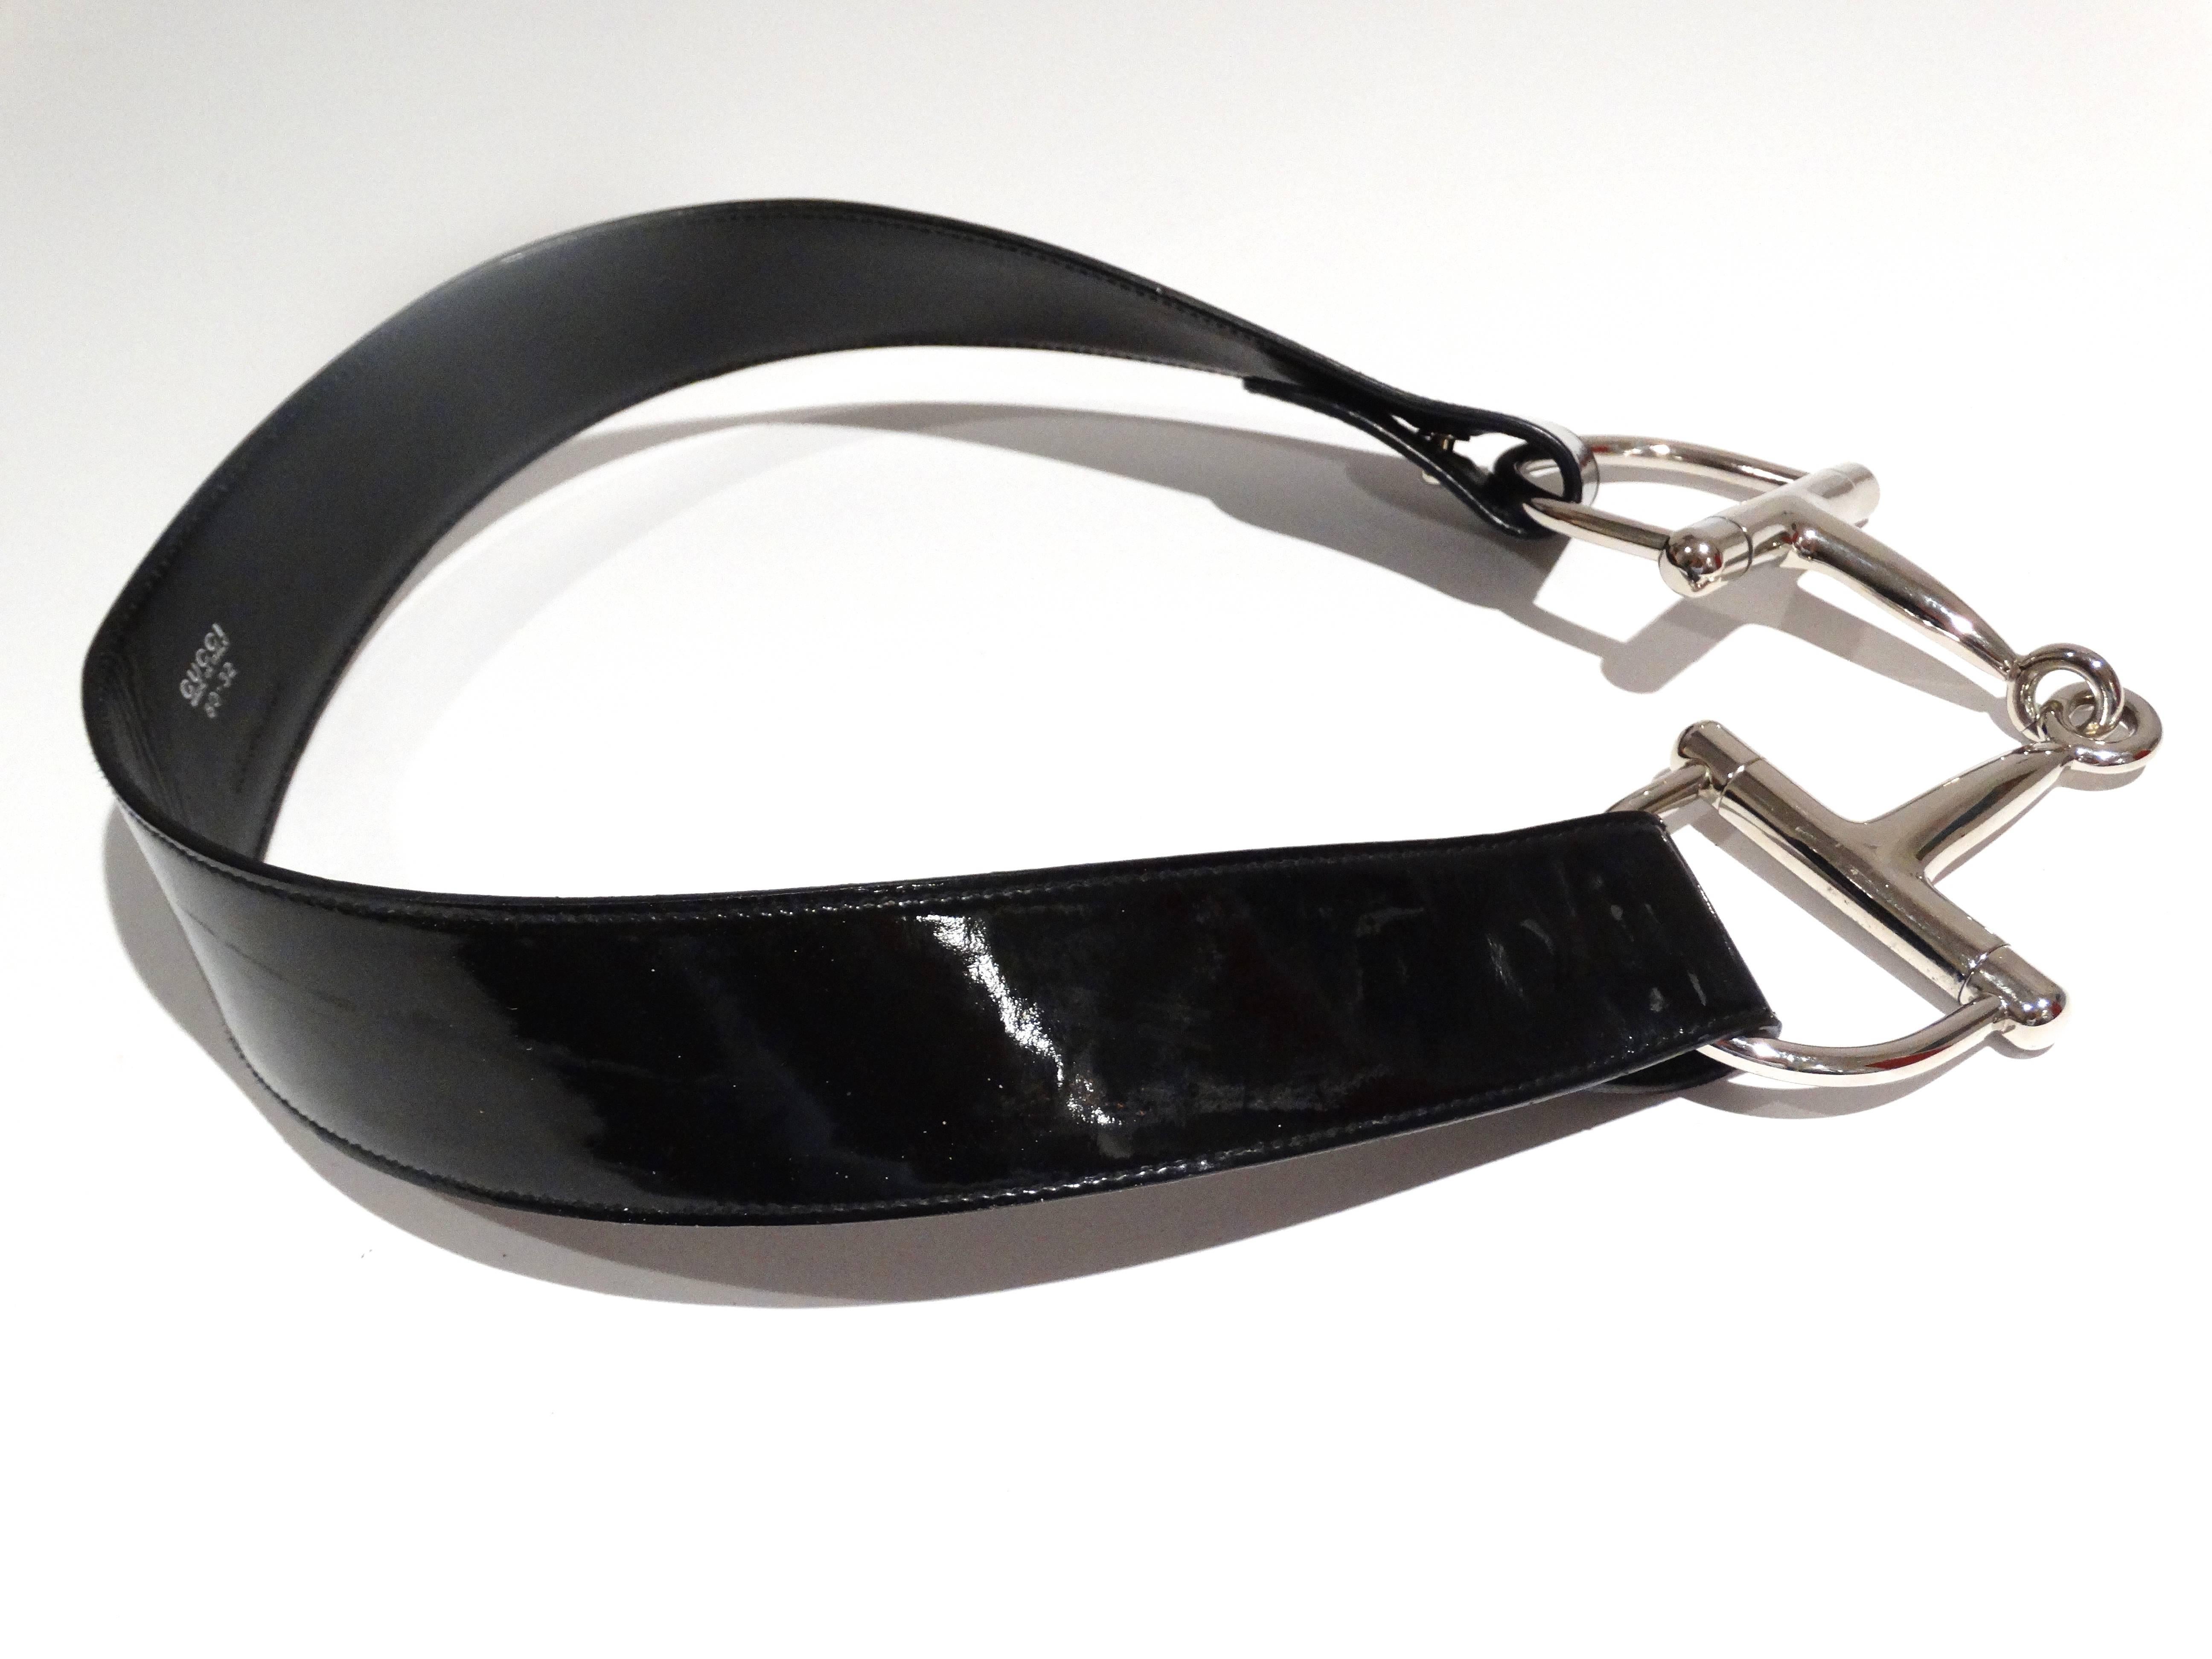 This iconic Gucci stirrup buckle belt in black patent leather is a Gucci and Tom Ford staple. Meant to sit low on hips.  in Excellent condition.  Tom Ford's first collection as seen on Madonna when she won her moon man! 

Measurements 28-32